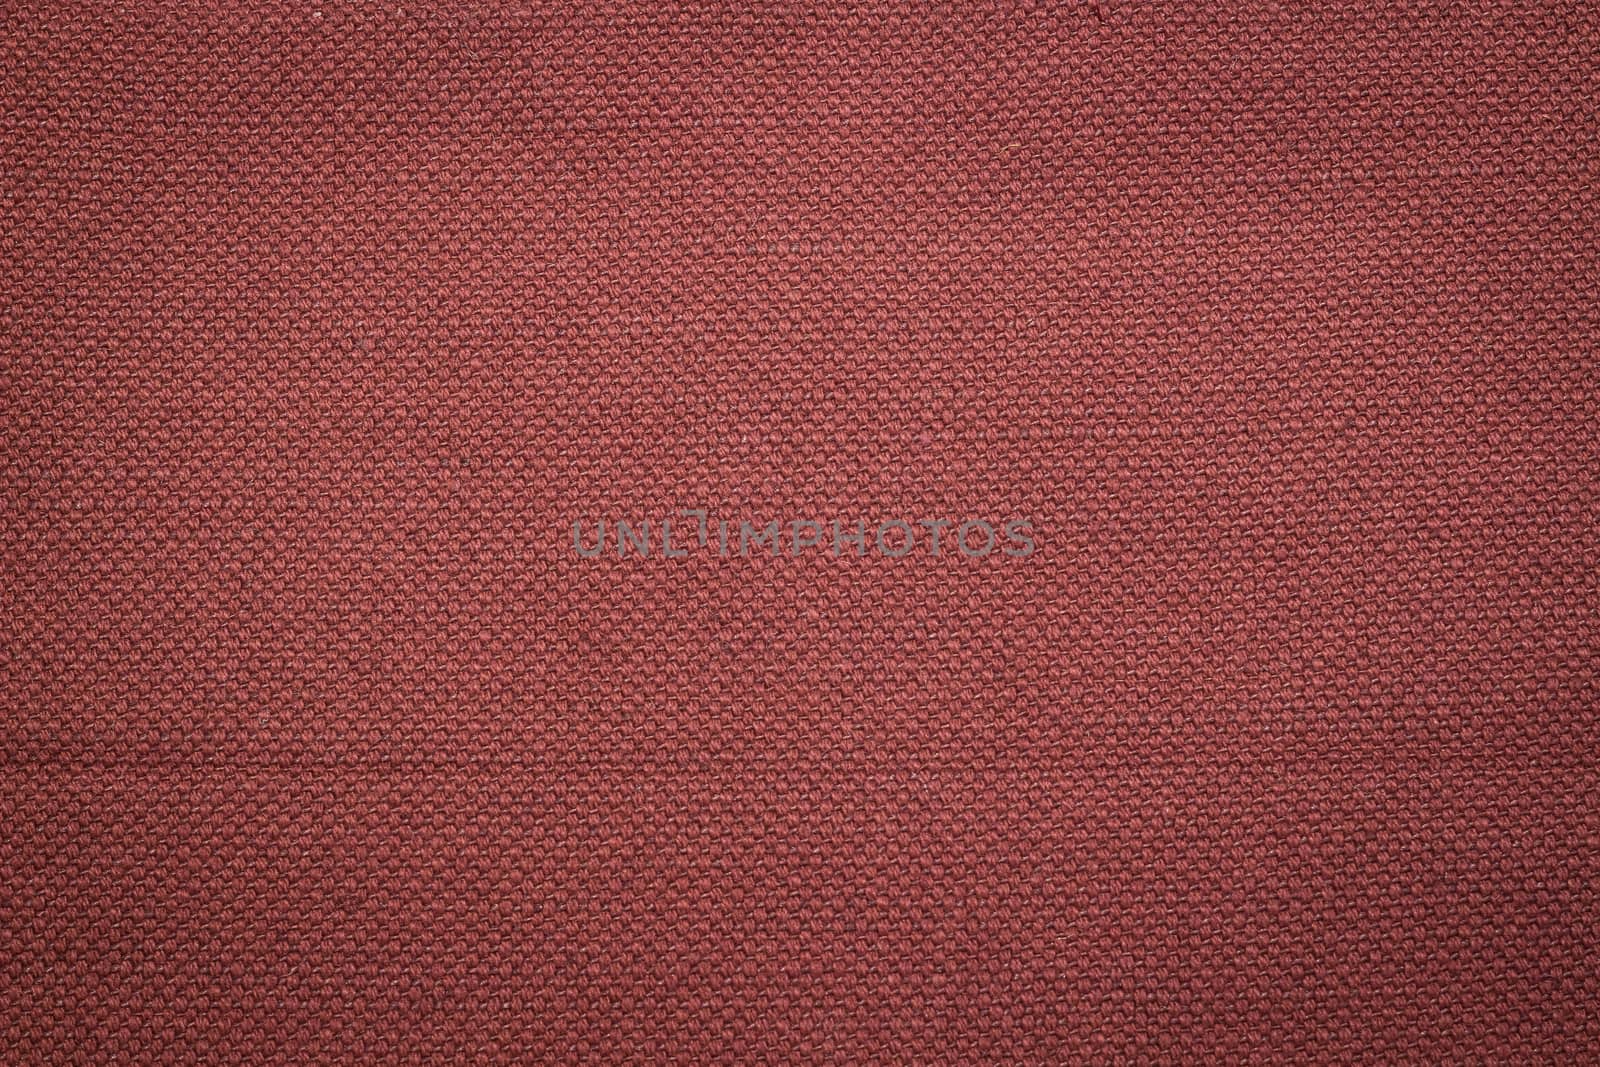 Rustic canvas fabric texture in red brick color. Square shape